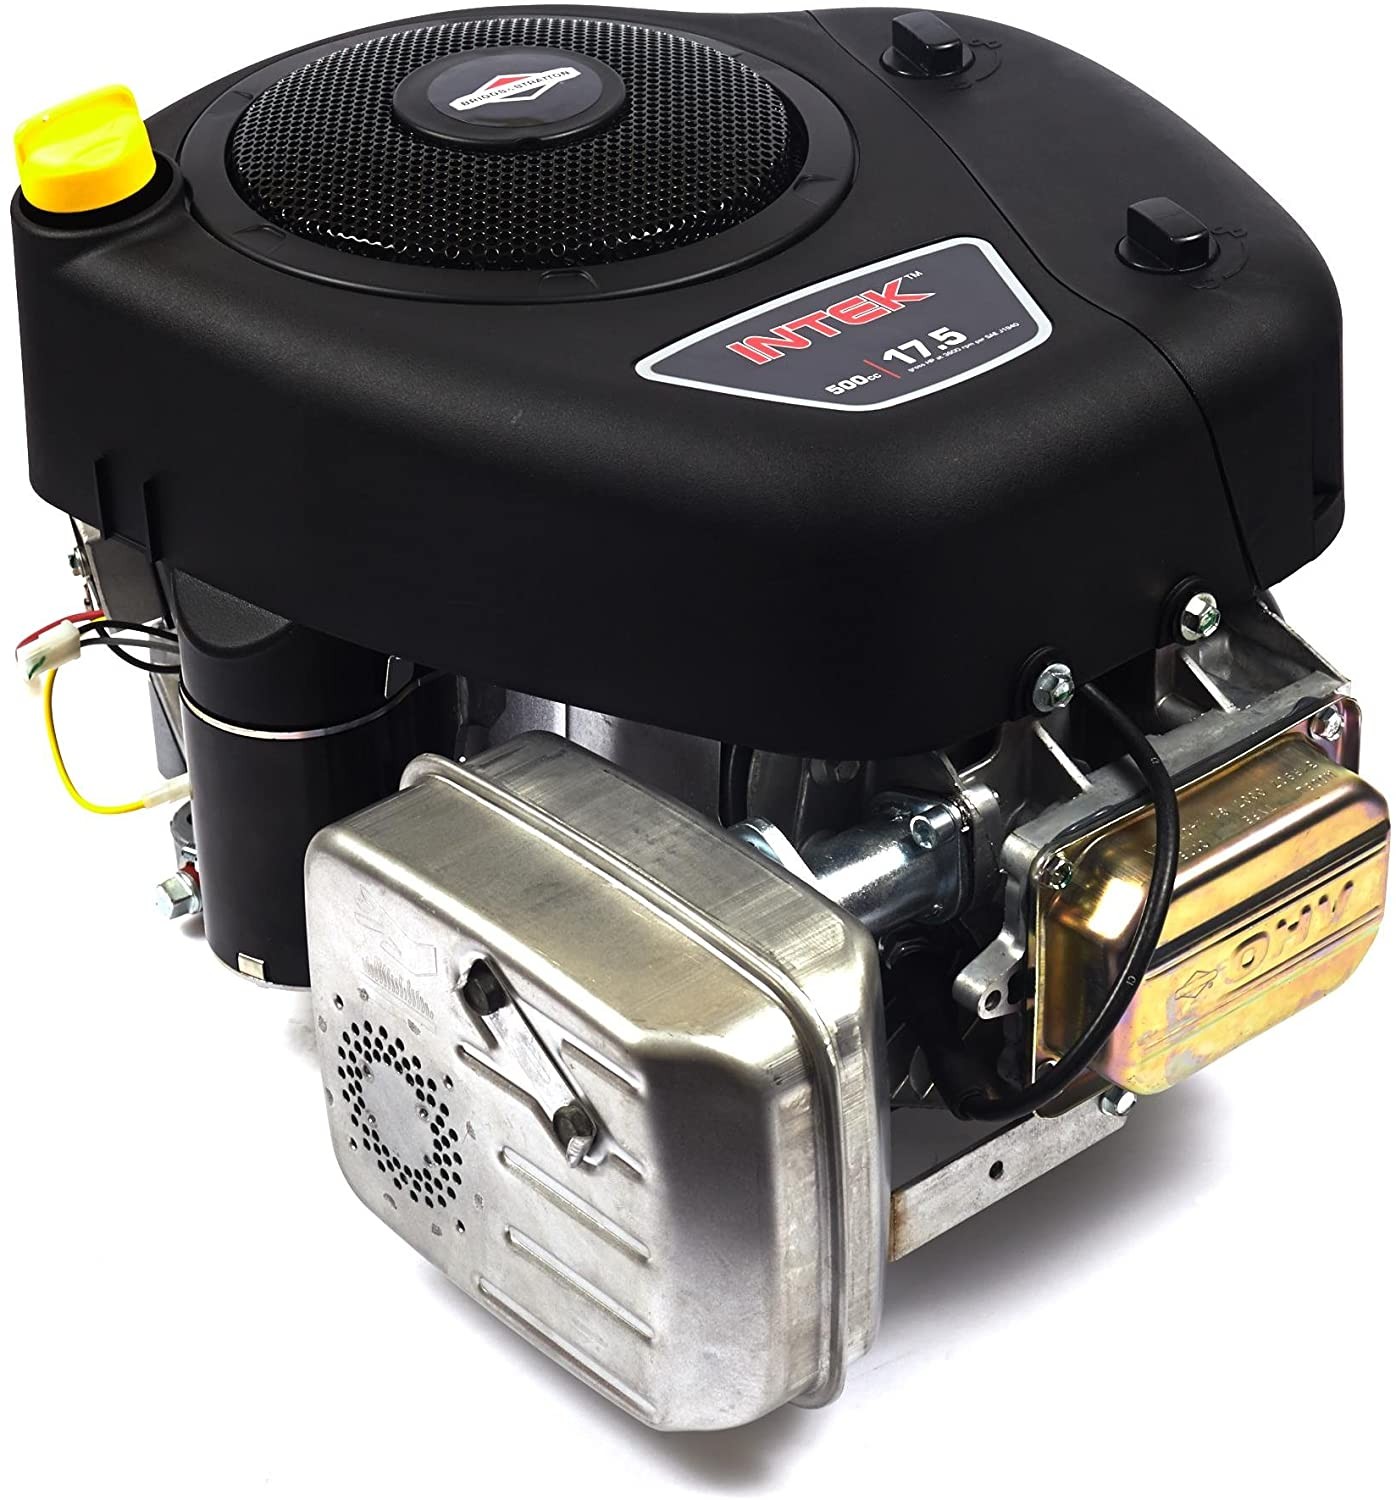 17.5 Hp Briggs and Stratton End Play Briggs & Stratton 31r907 0007 G1 500cc 17 5 Gross Hp Engine with 1 Inch by 3 5 32 Inch Length Crankshaft Tapped 7 16 20 Inch Of 17.5 Hp Briggs and Stratton End Play